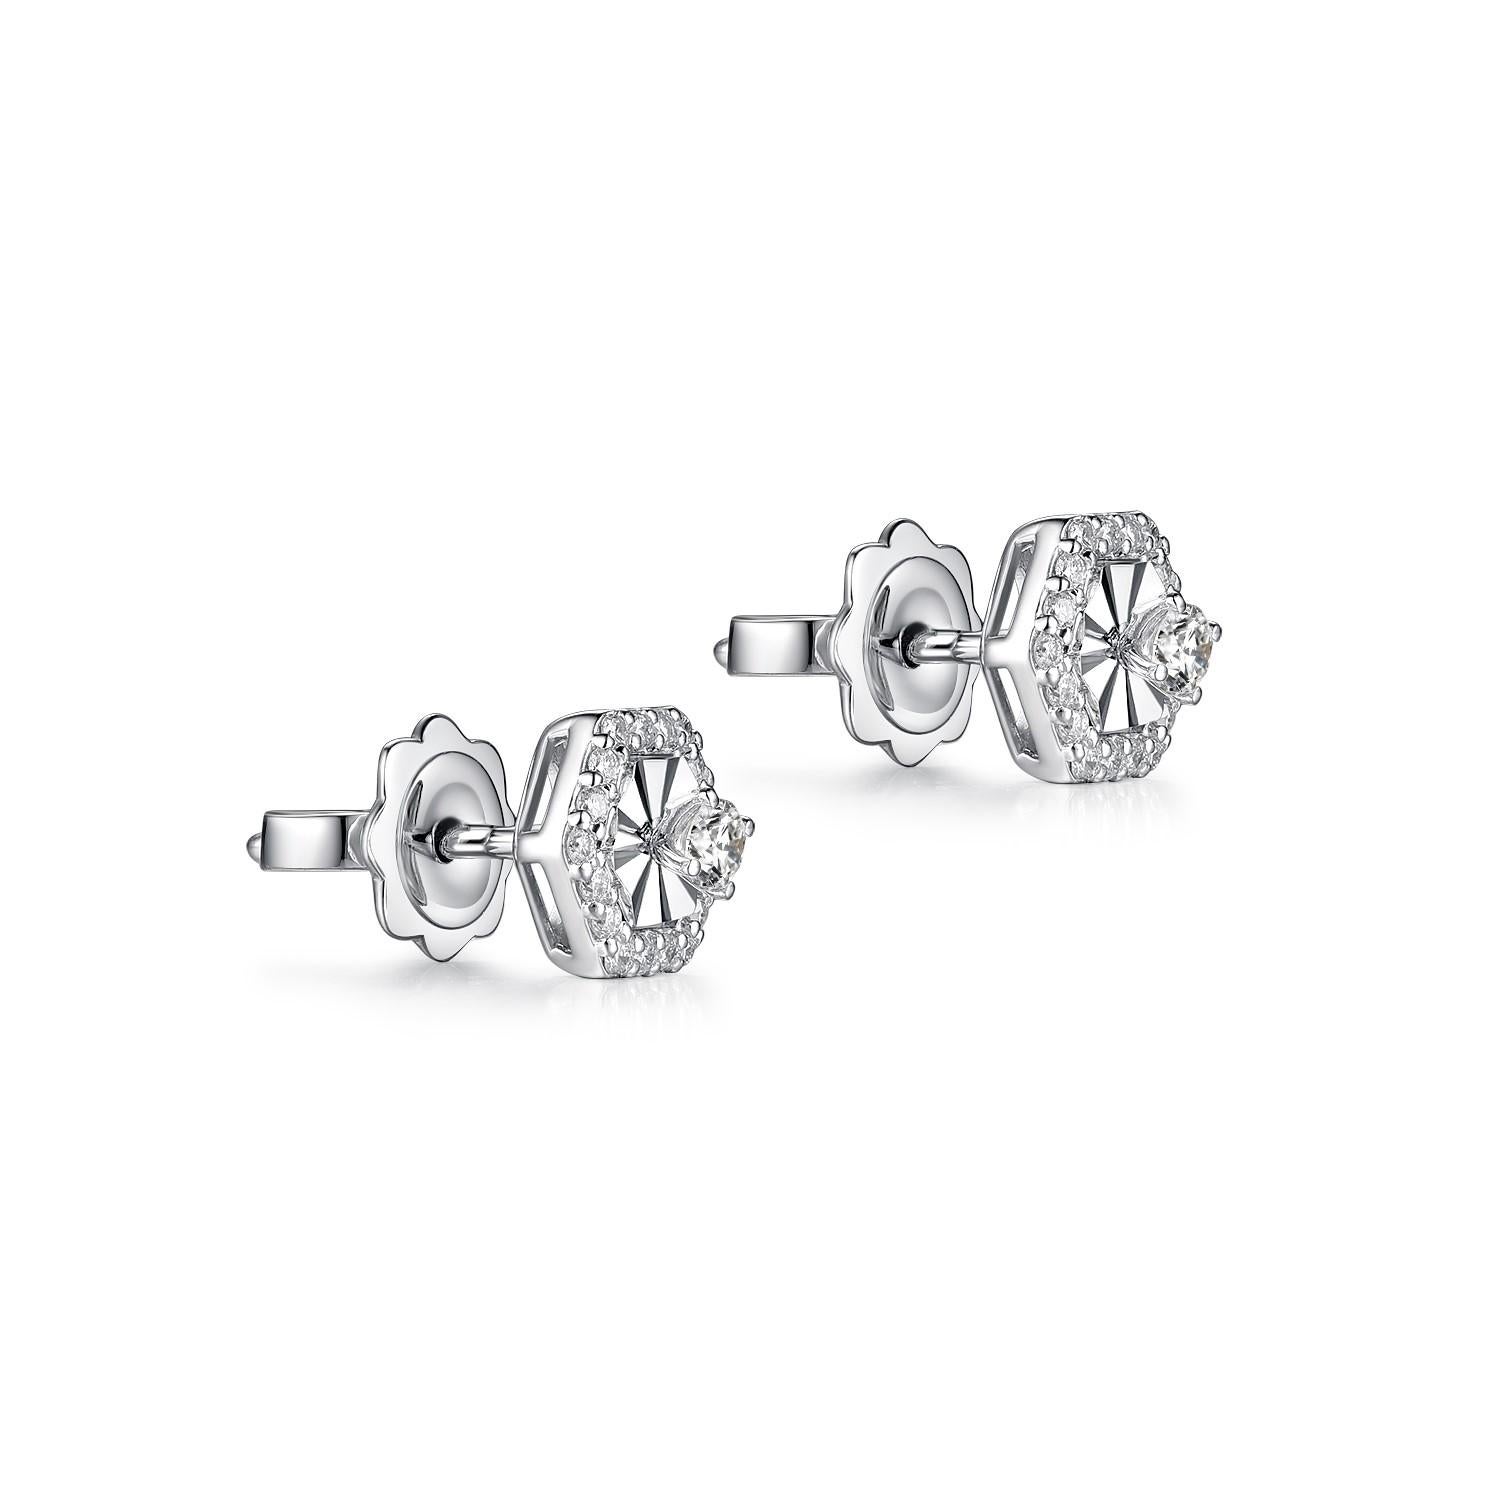 This earrings feature 0.32 carat of round diamonds.  The center contains 2 round diamonds and with a diamond halo on the outside.  Earrings are set in 14 karat white gold.  A simply piece that great for everyday use.

14 karat white gold
Diamond